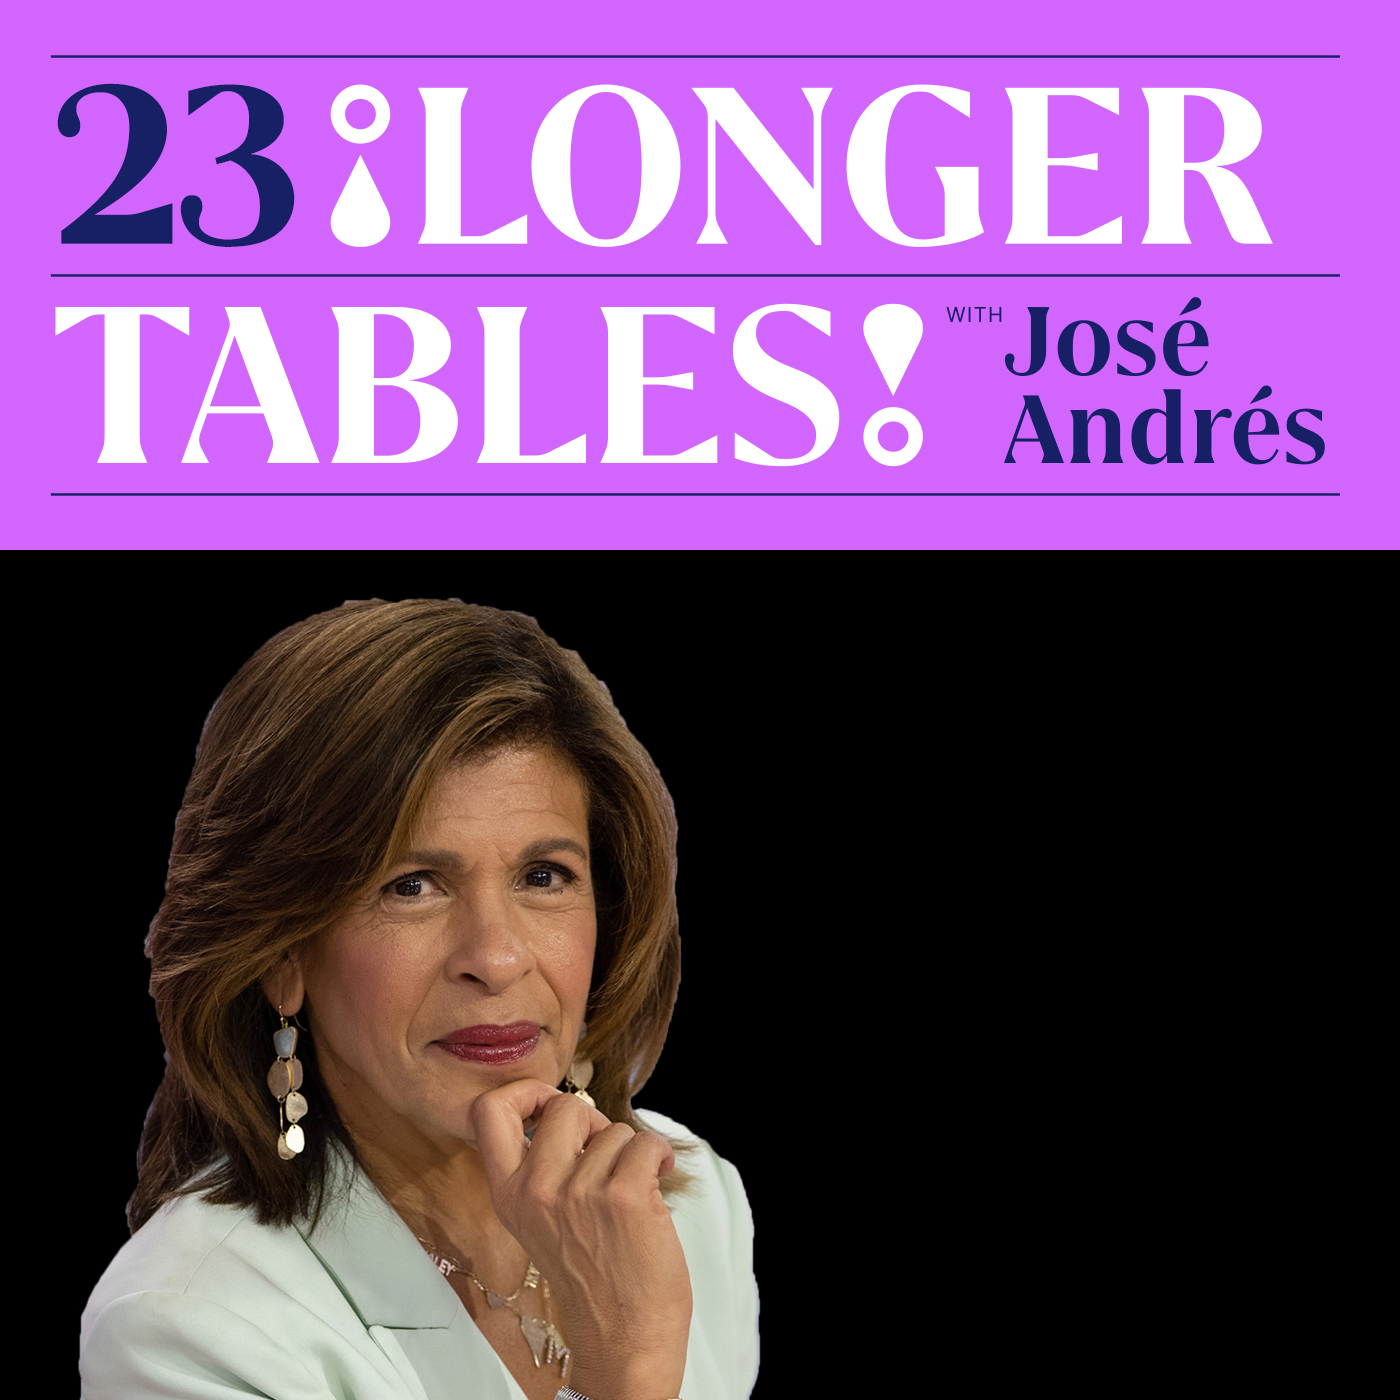 Hoda Kotb: Connecting better with the people at your table